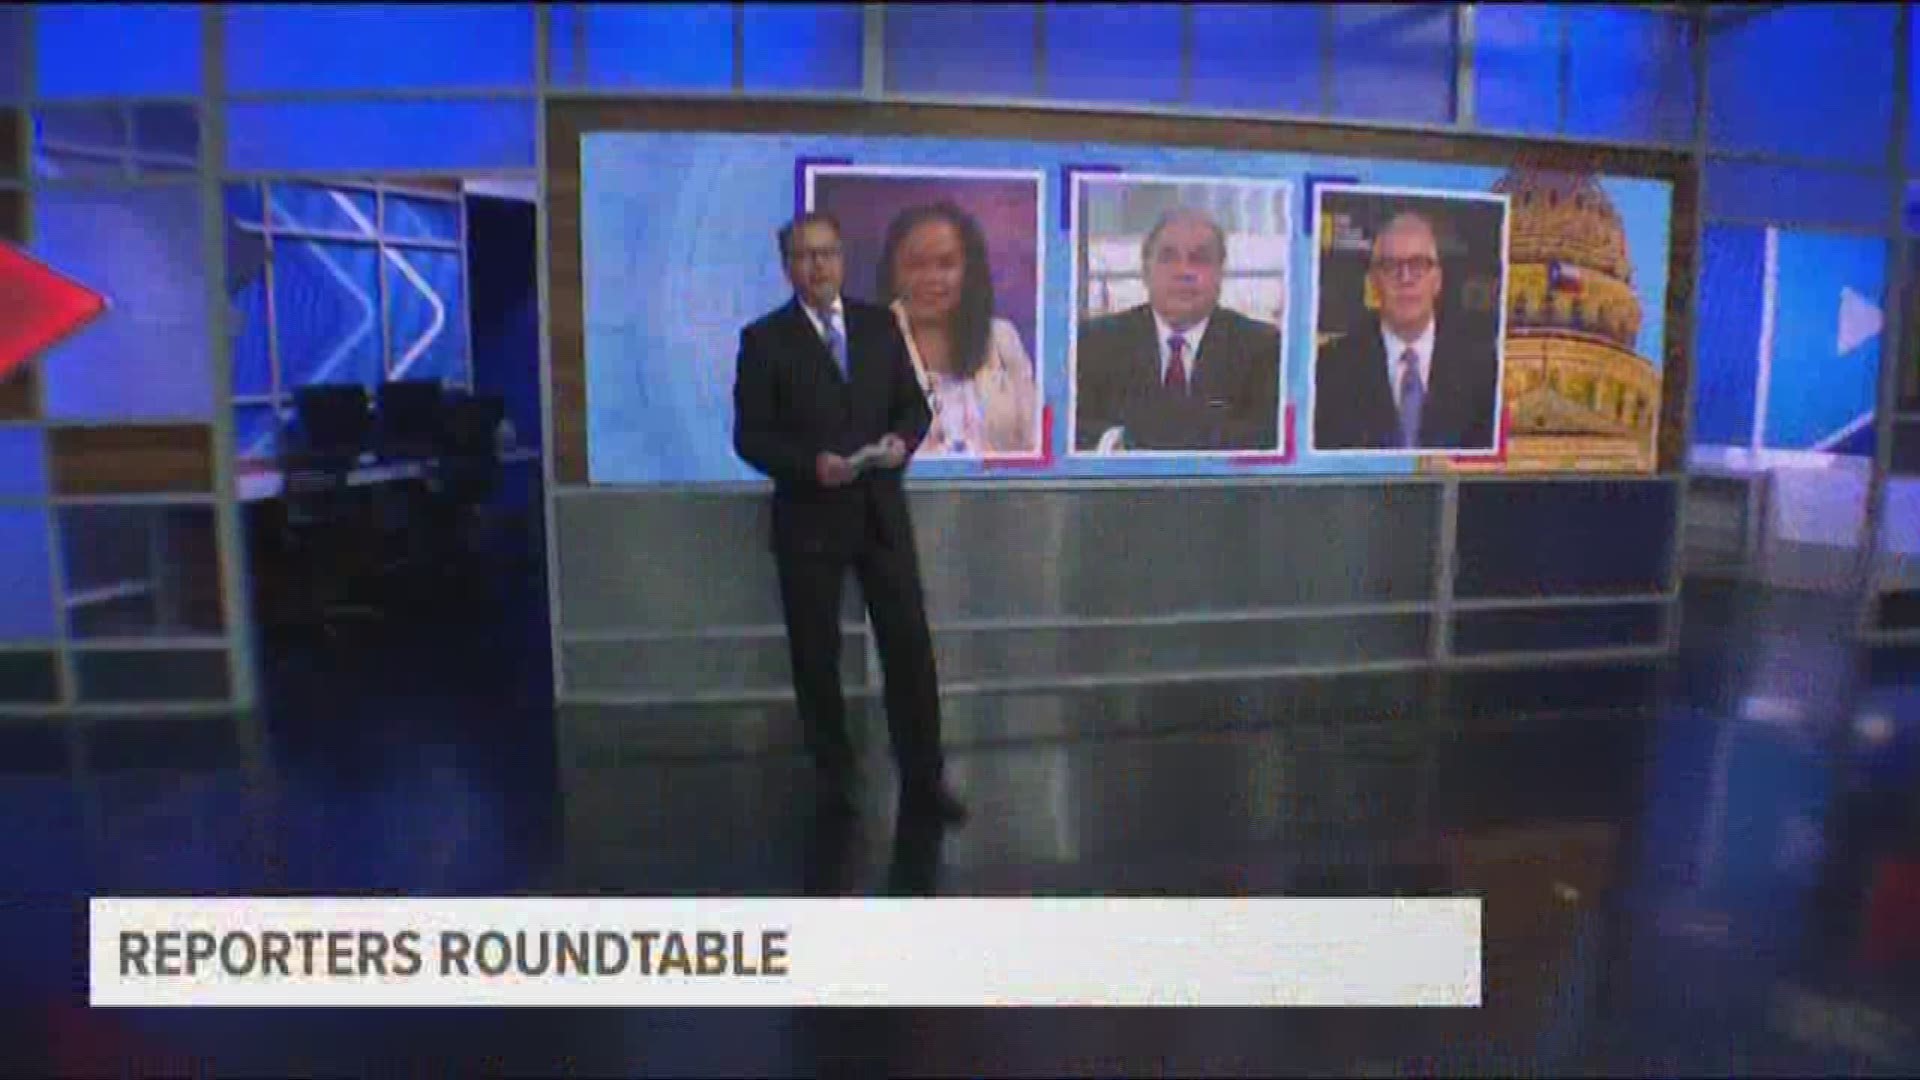 Reporters Roundtable puts the headlines in perspective each week. Ross and Bud returned along with Berna Dean Steptoe, WFAA's political producer. All three journalists discussed reactions to the new school district ratings issued last week by the Texas Ed